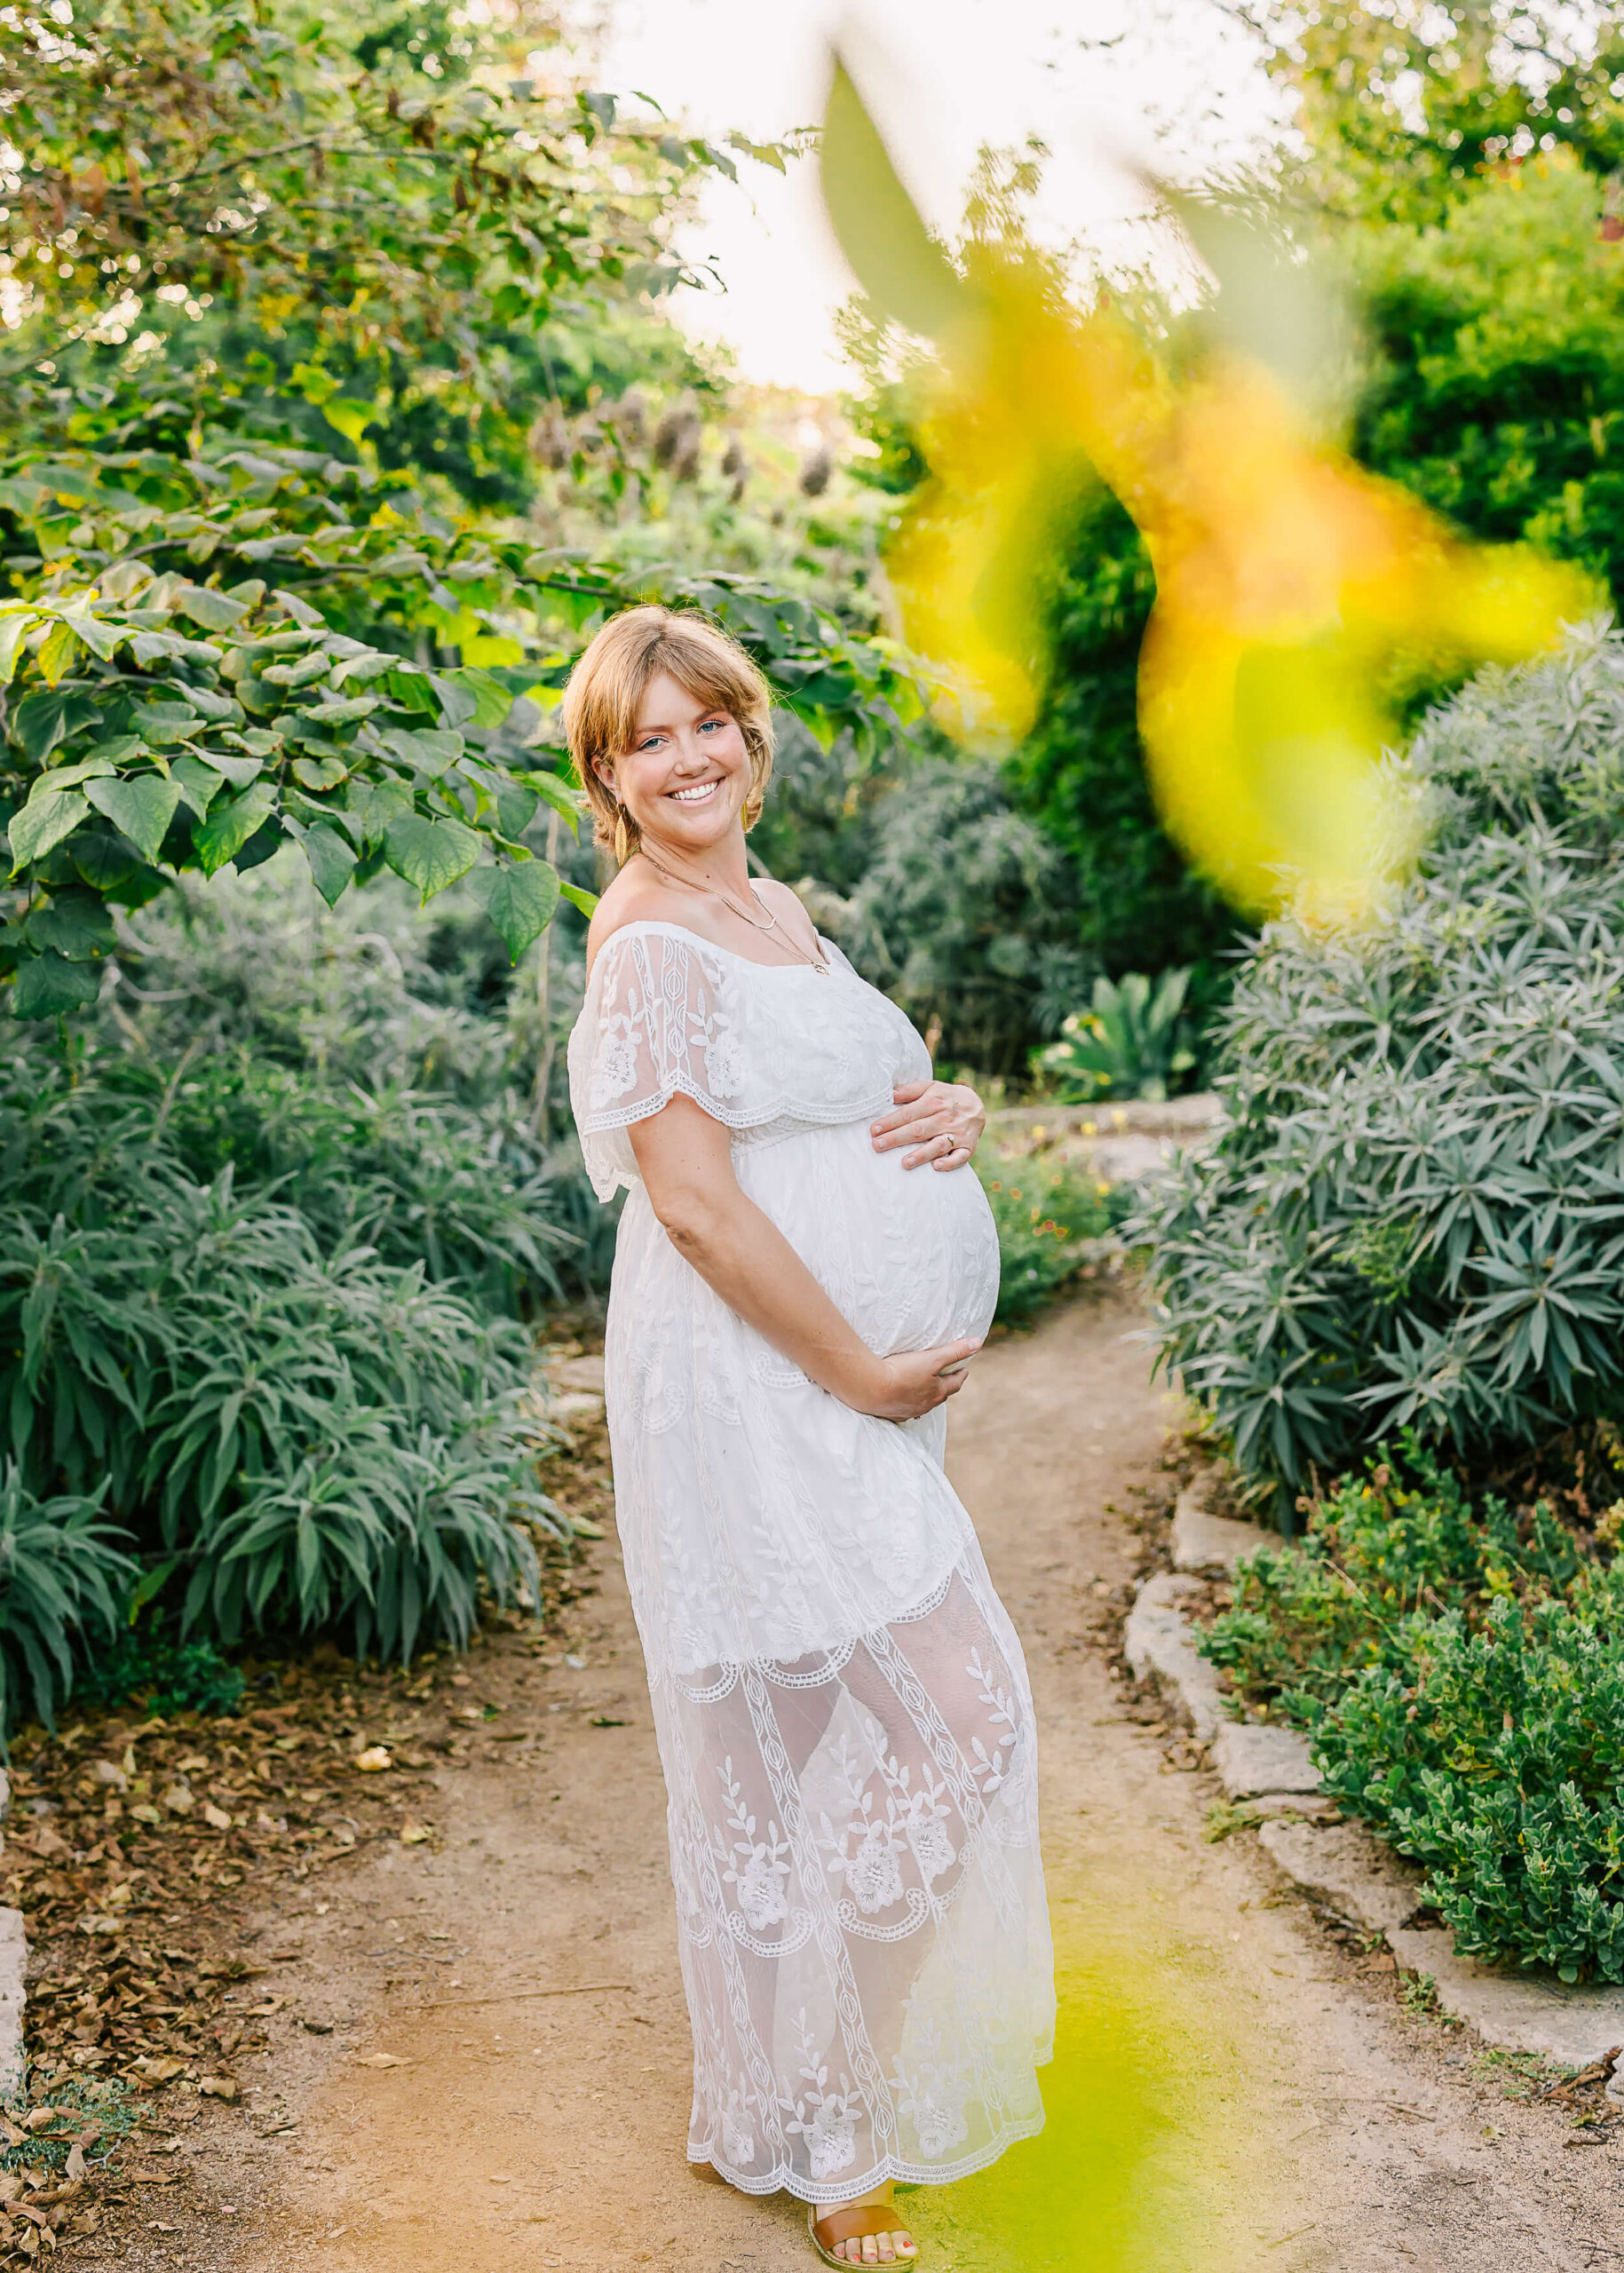 Expectant Mama wearing a beautiful boho white lace dress smiling in outdoor nature maternity session.